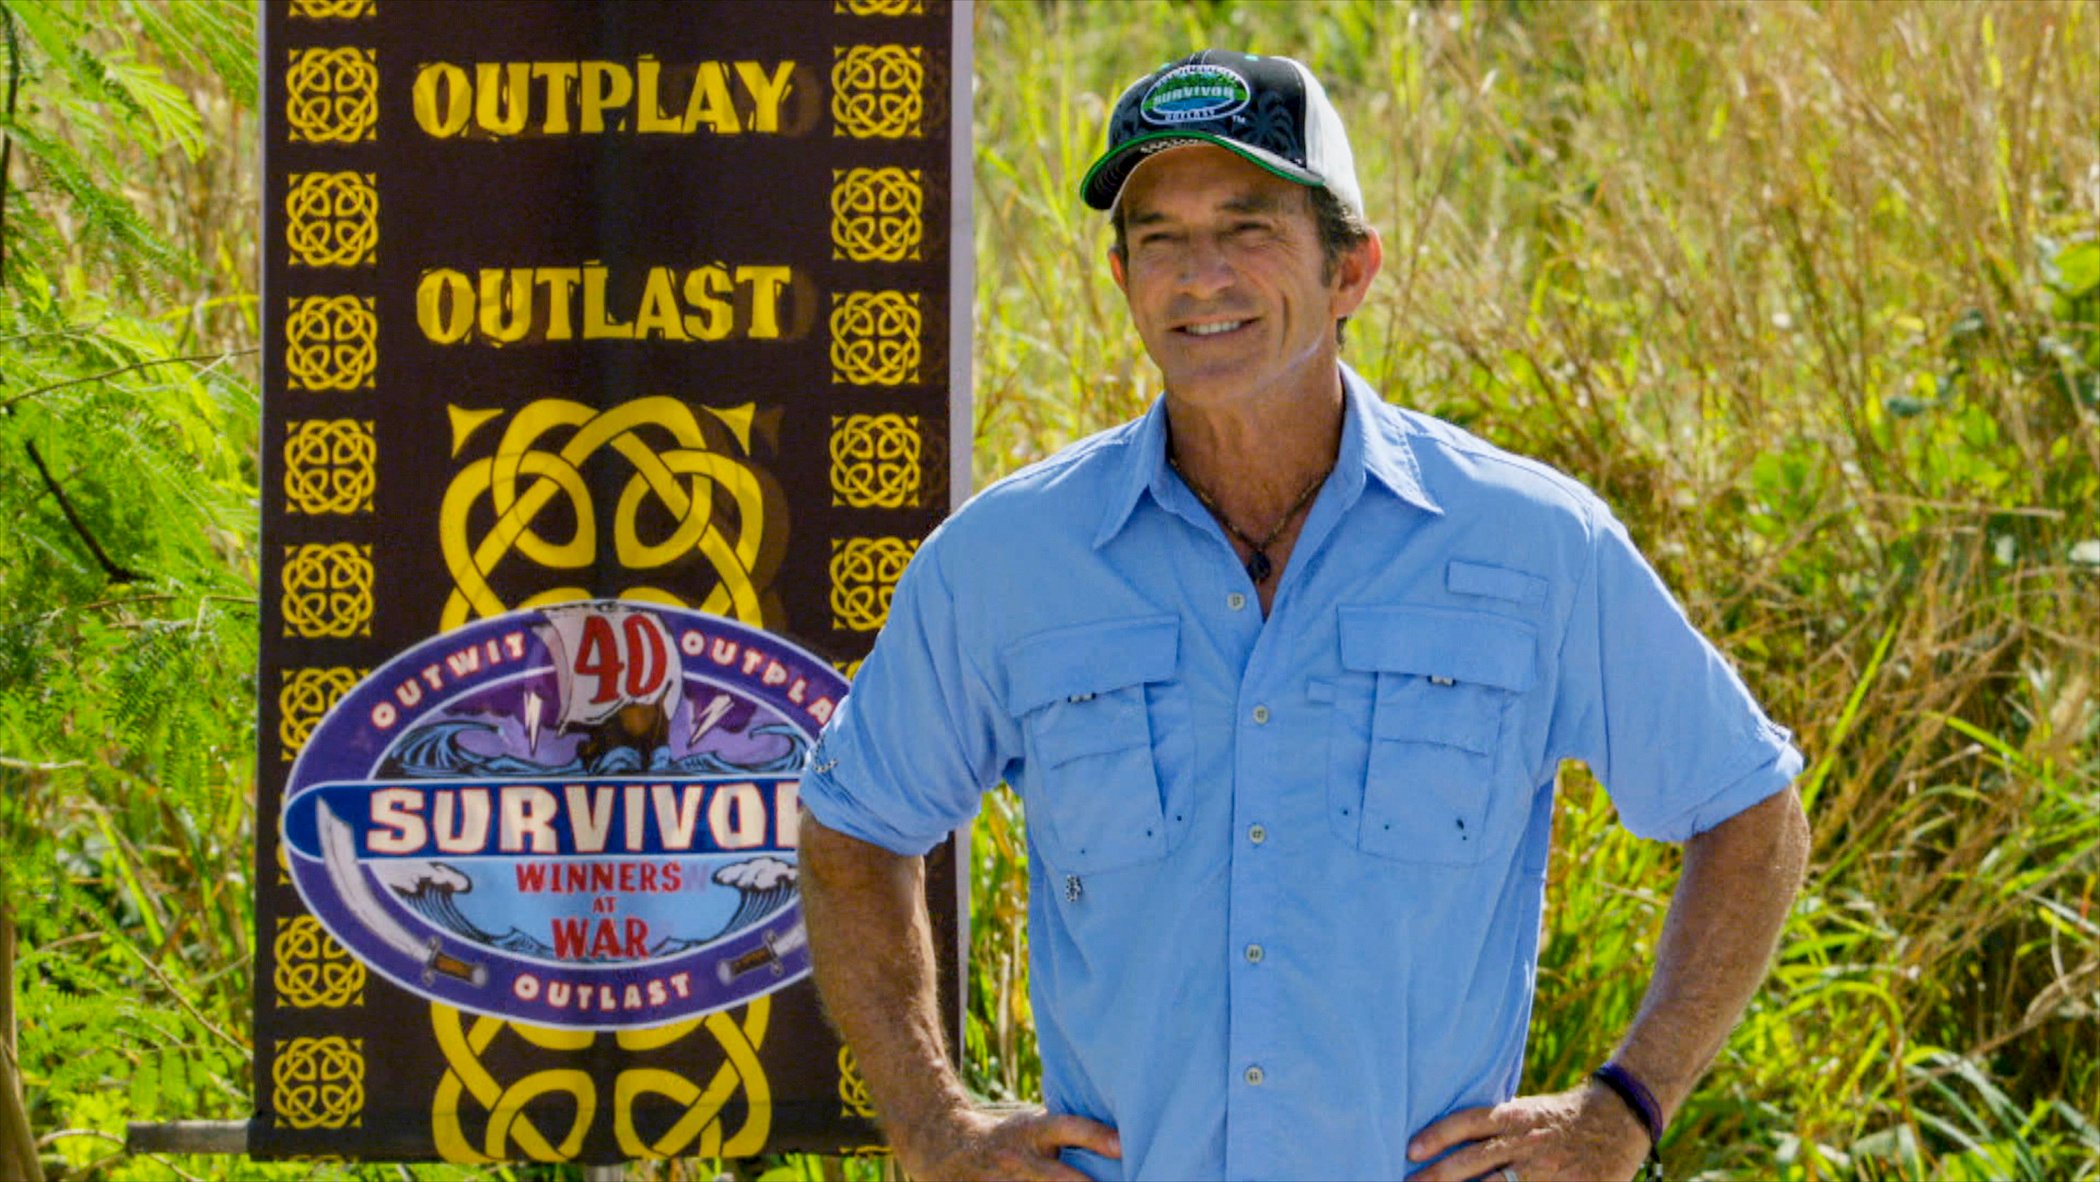 Jeff Probst, the 'Survivor' Season 41 host, smiling while outdoors on the show